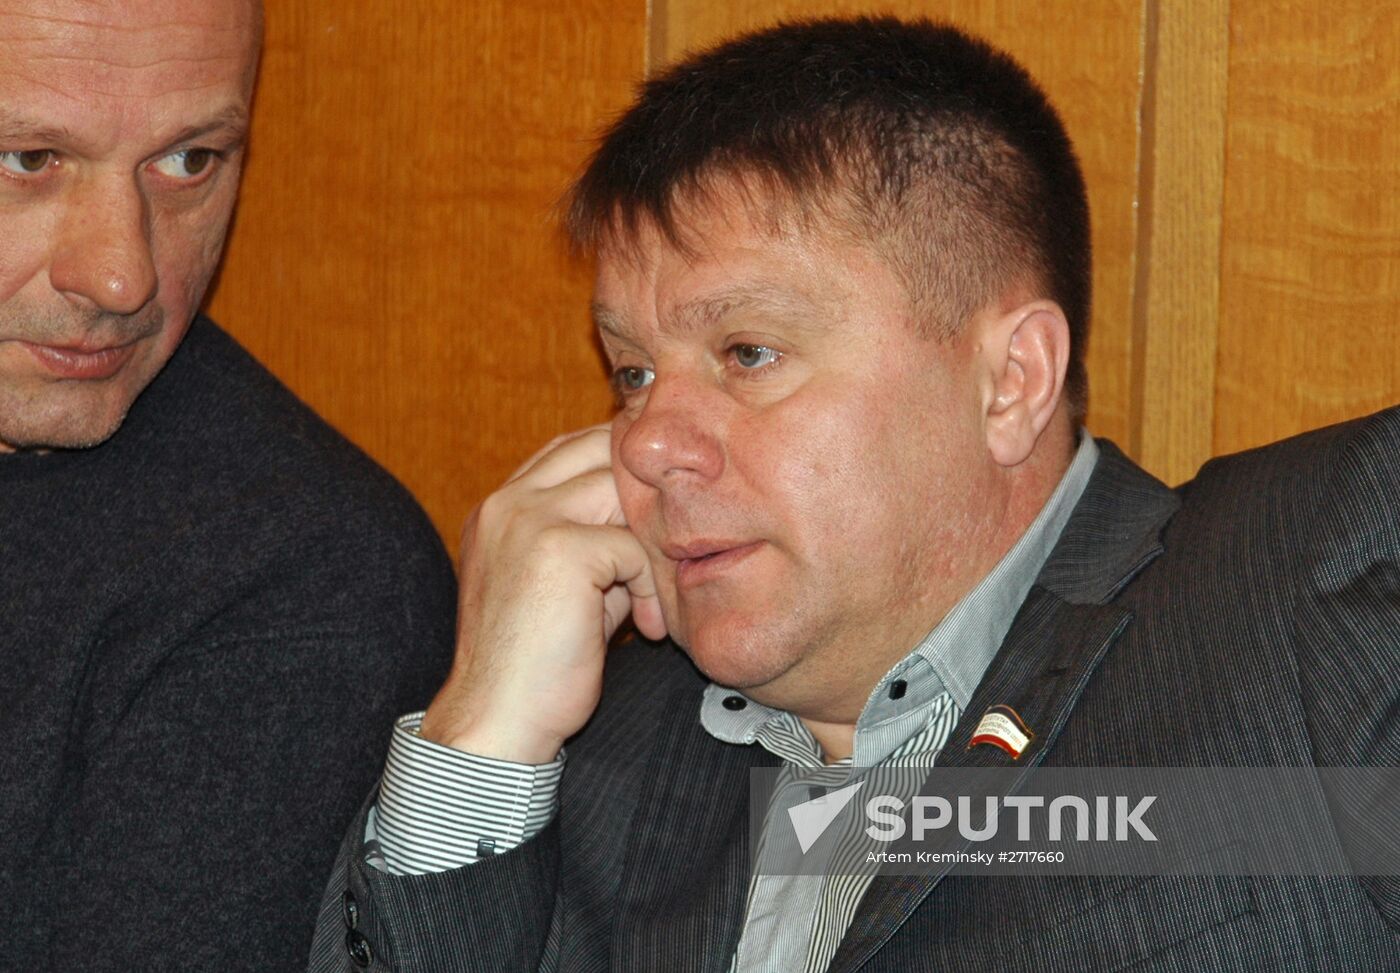 Federal security agents detain Crimean State Council deputy Valery Grinevich